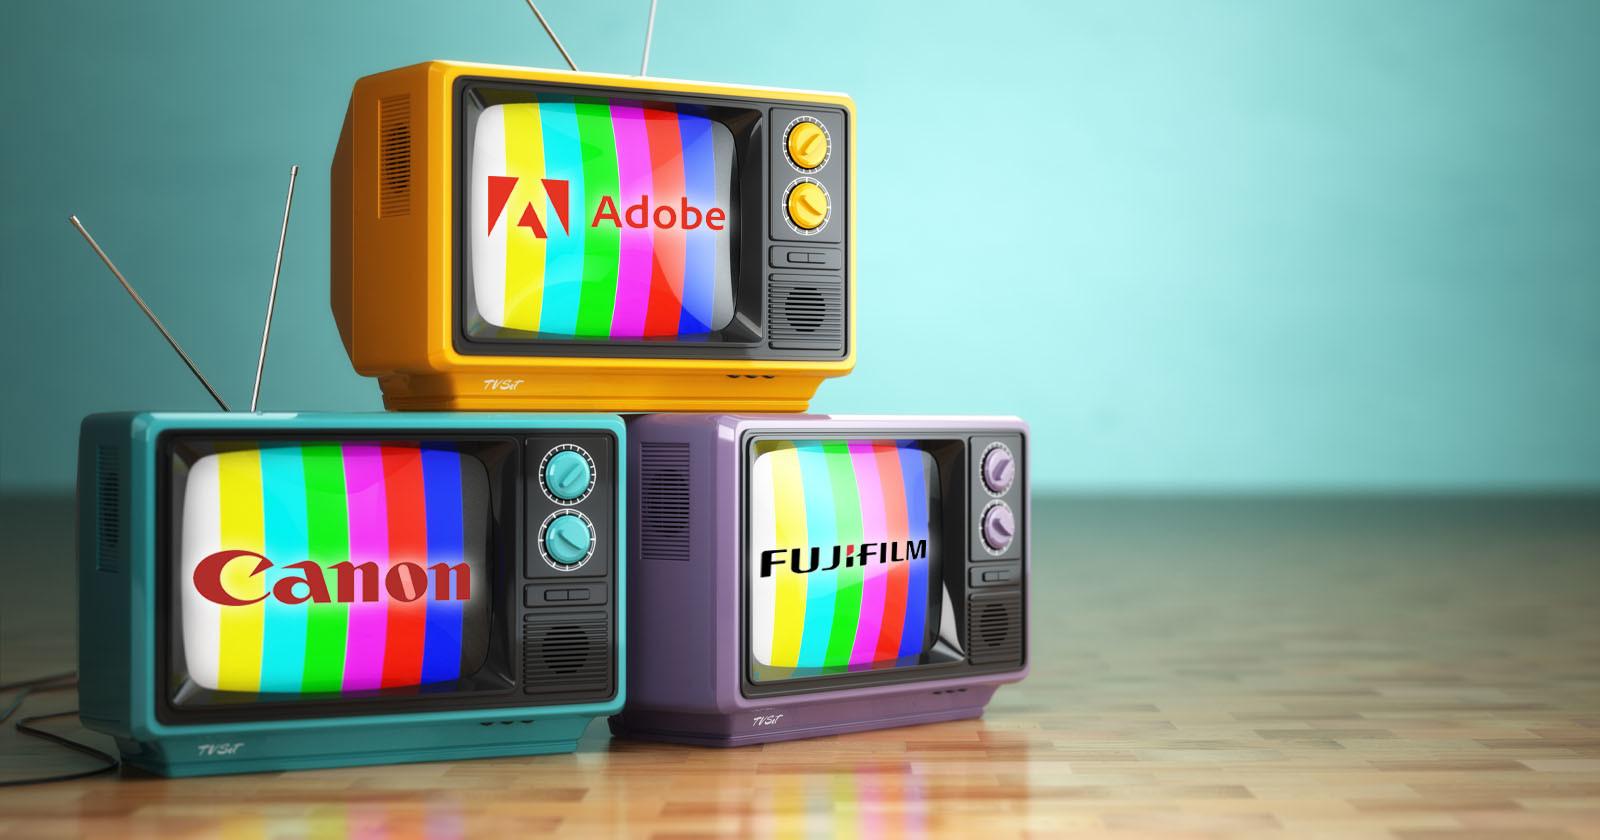 How Canon, Adobe, and Fujifilms Video Ads Reveal Business Strategies